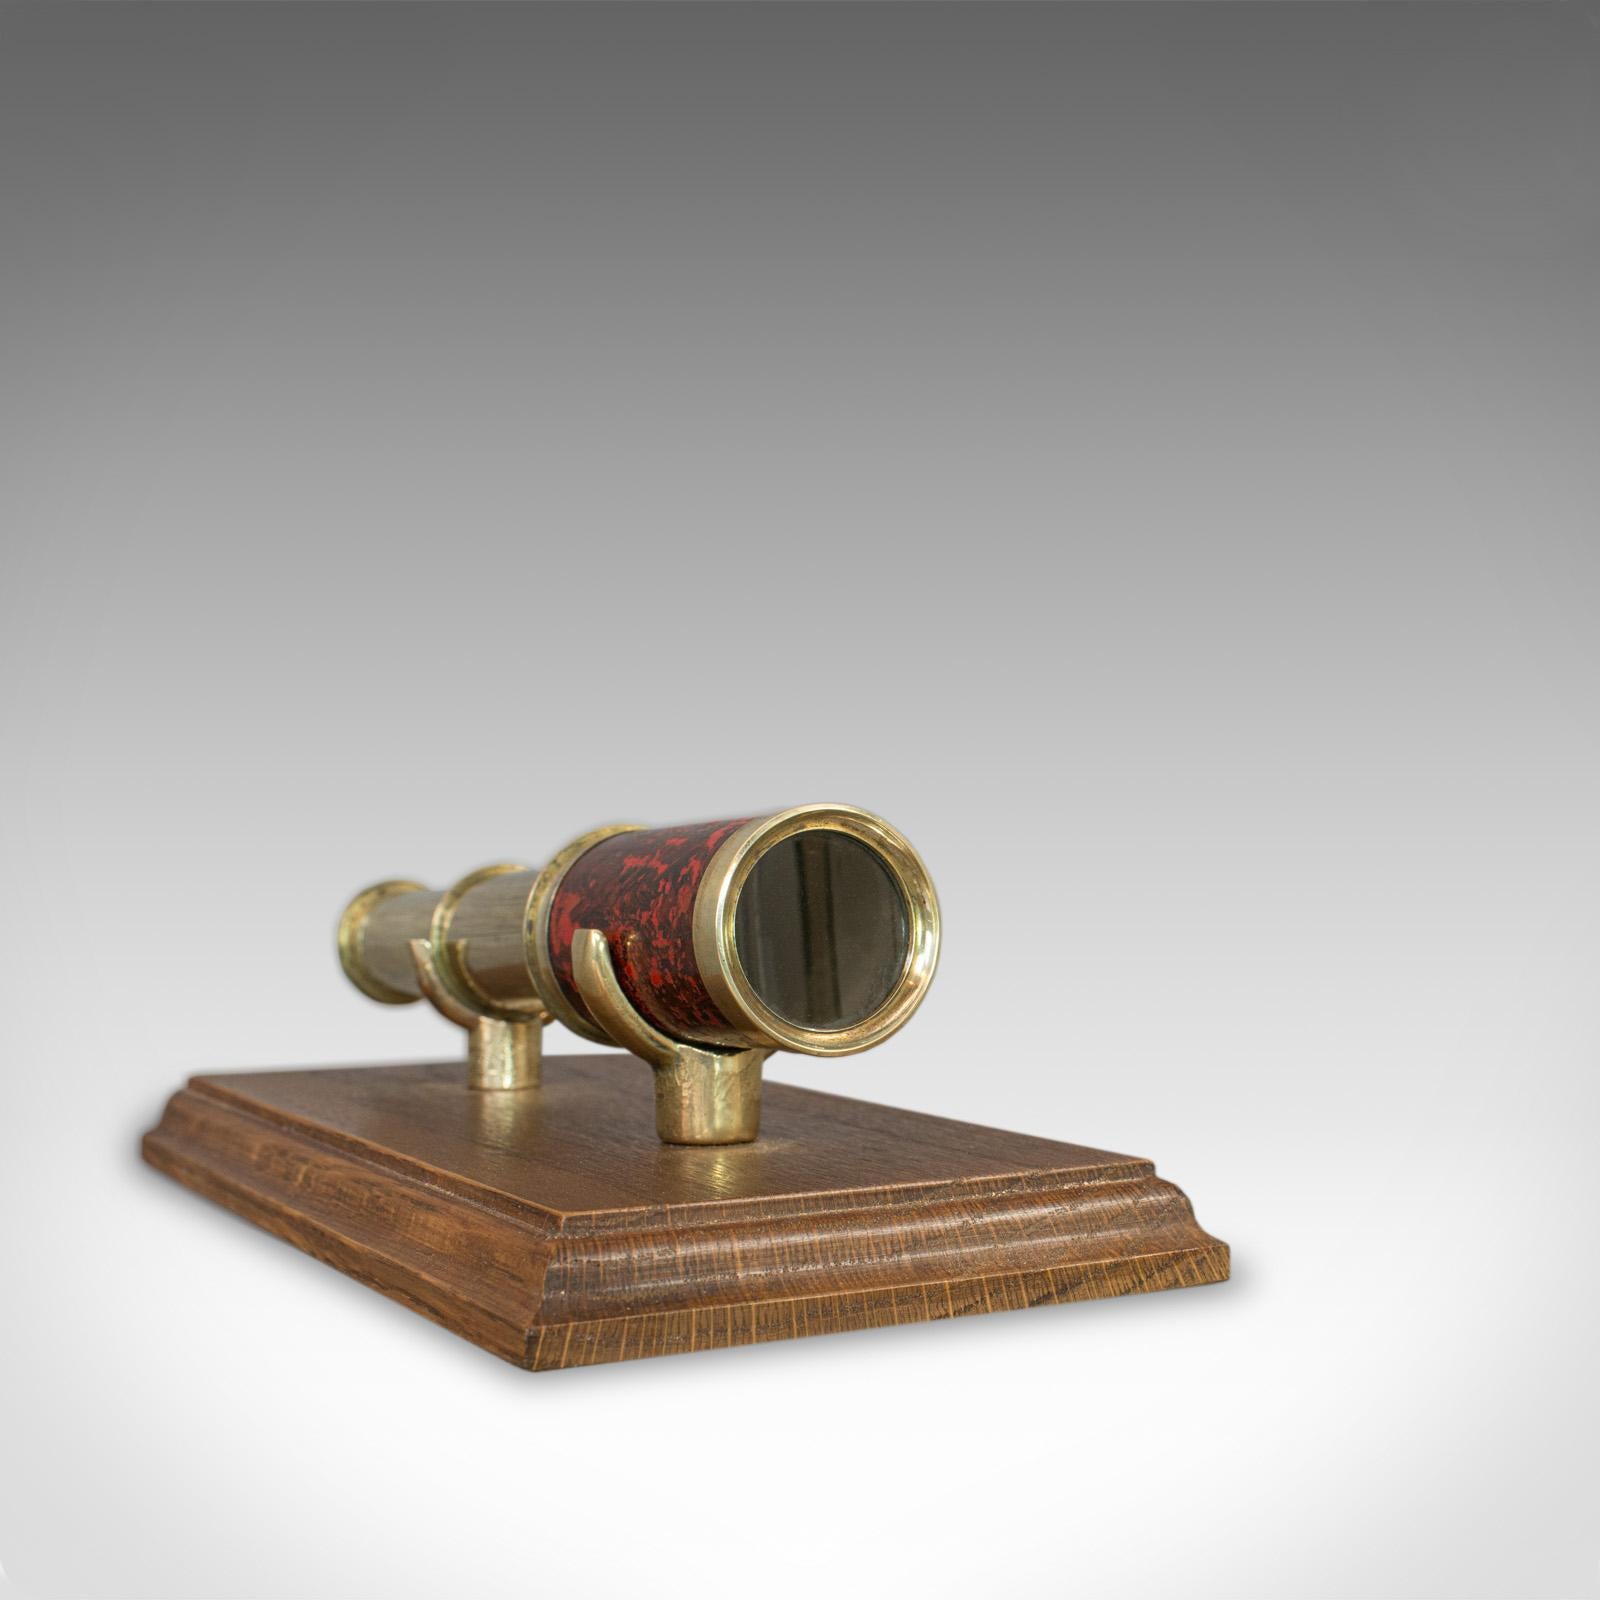 19th Century Antique Pocket Telescope, English, Two Draw, Small, Terrestrial, Victorian